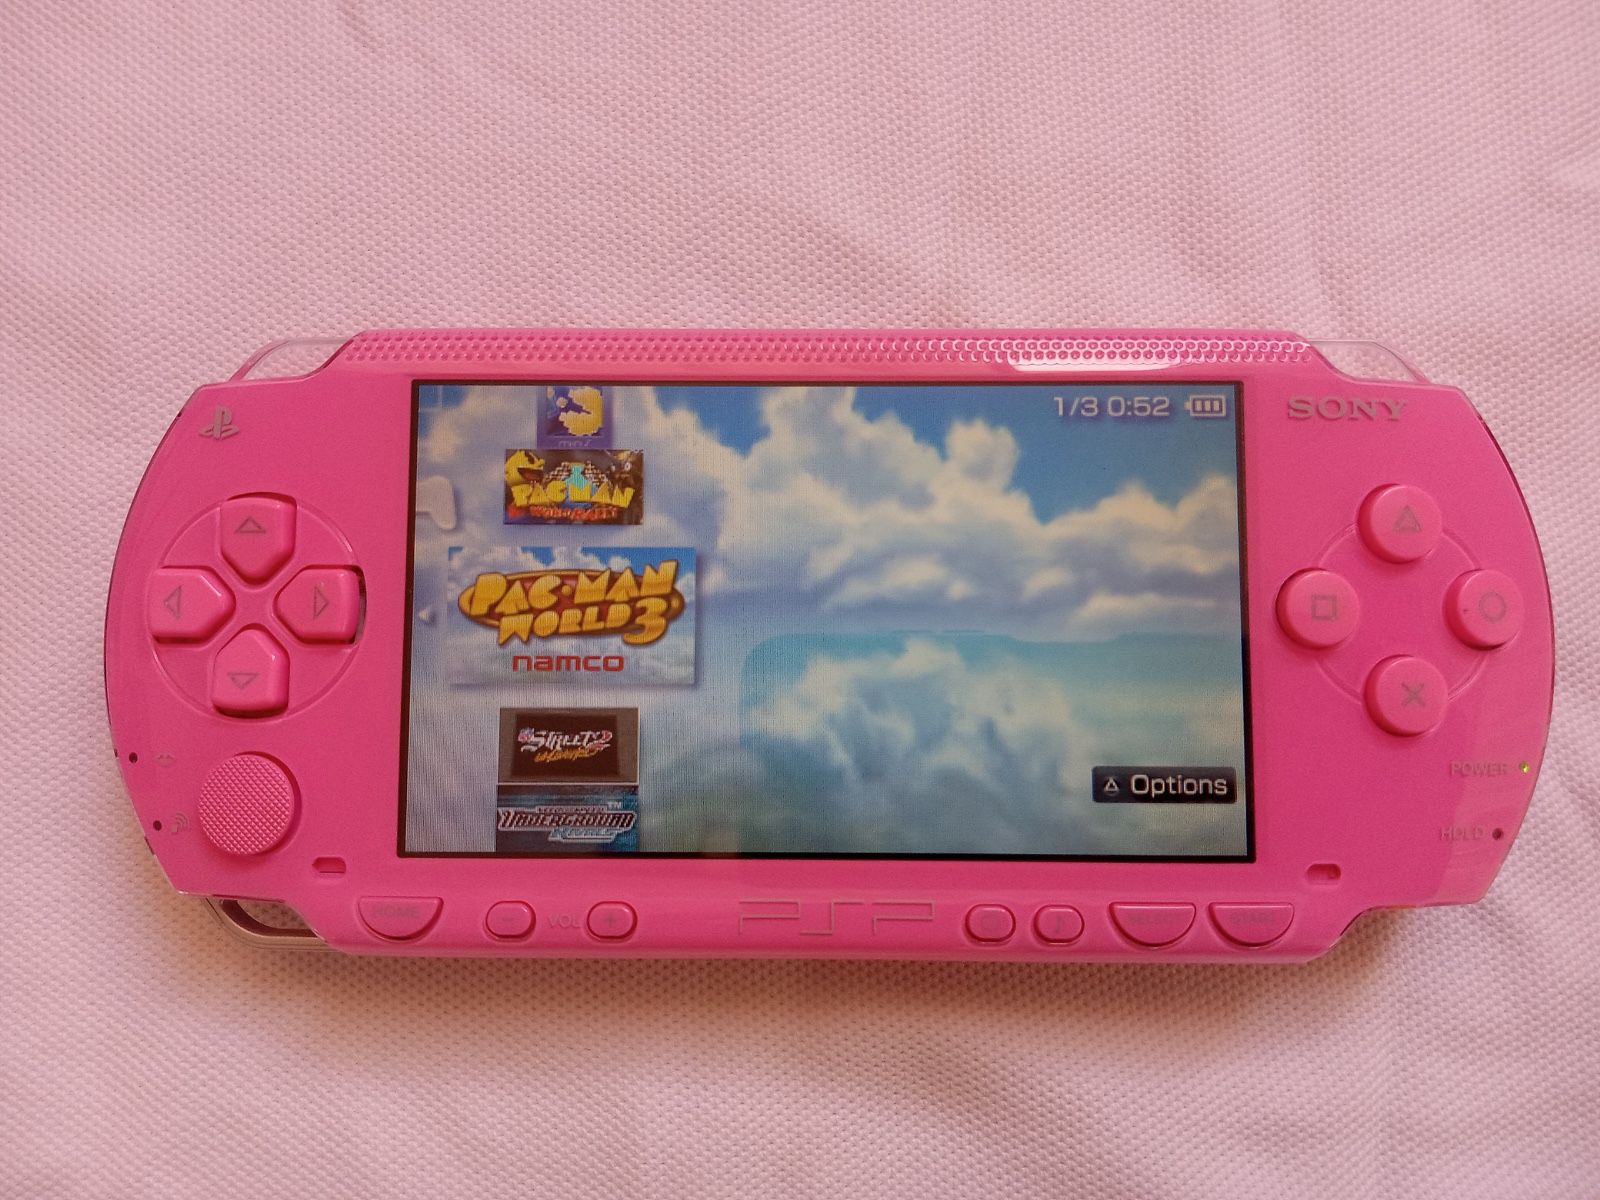 PINK * PSP * WITH 5,000 GAMES